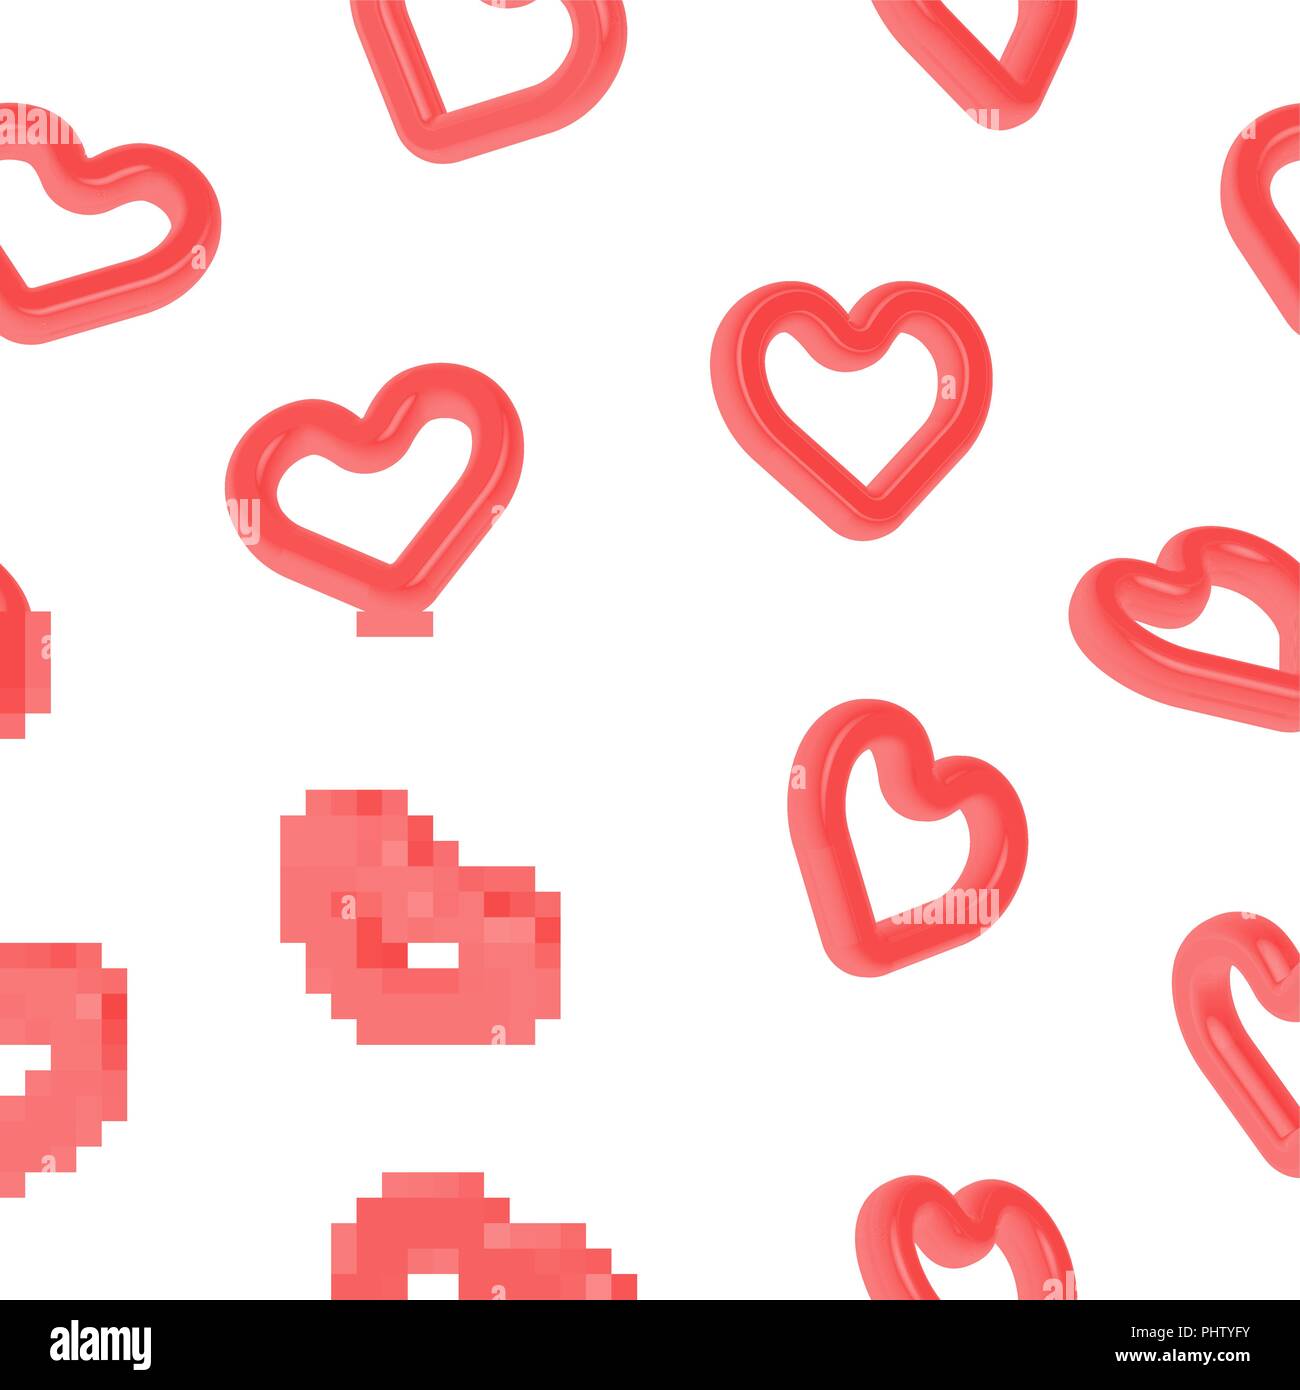 Heart Shape seamless pattern with red heartshape symbol in realistic 3d style. Love background illustration, social media like or health concept. EPS1 Stock Vector